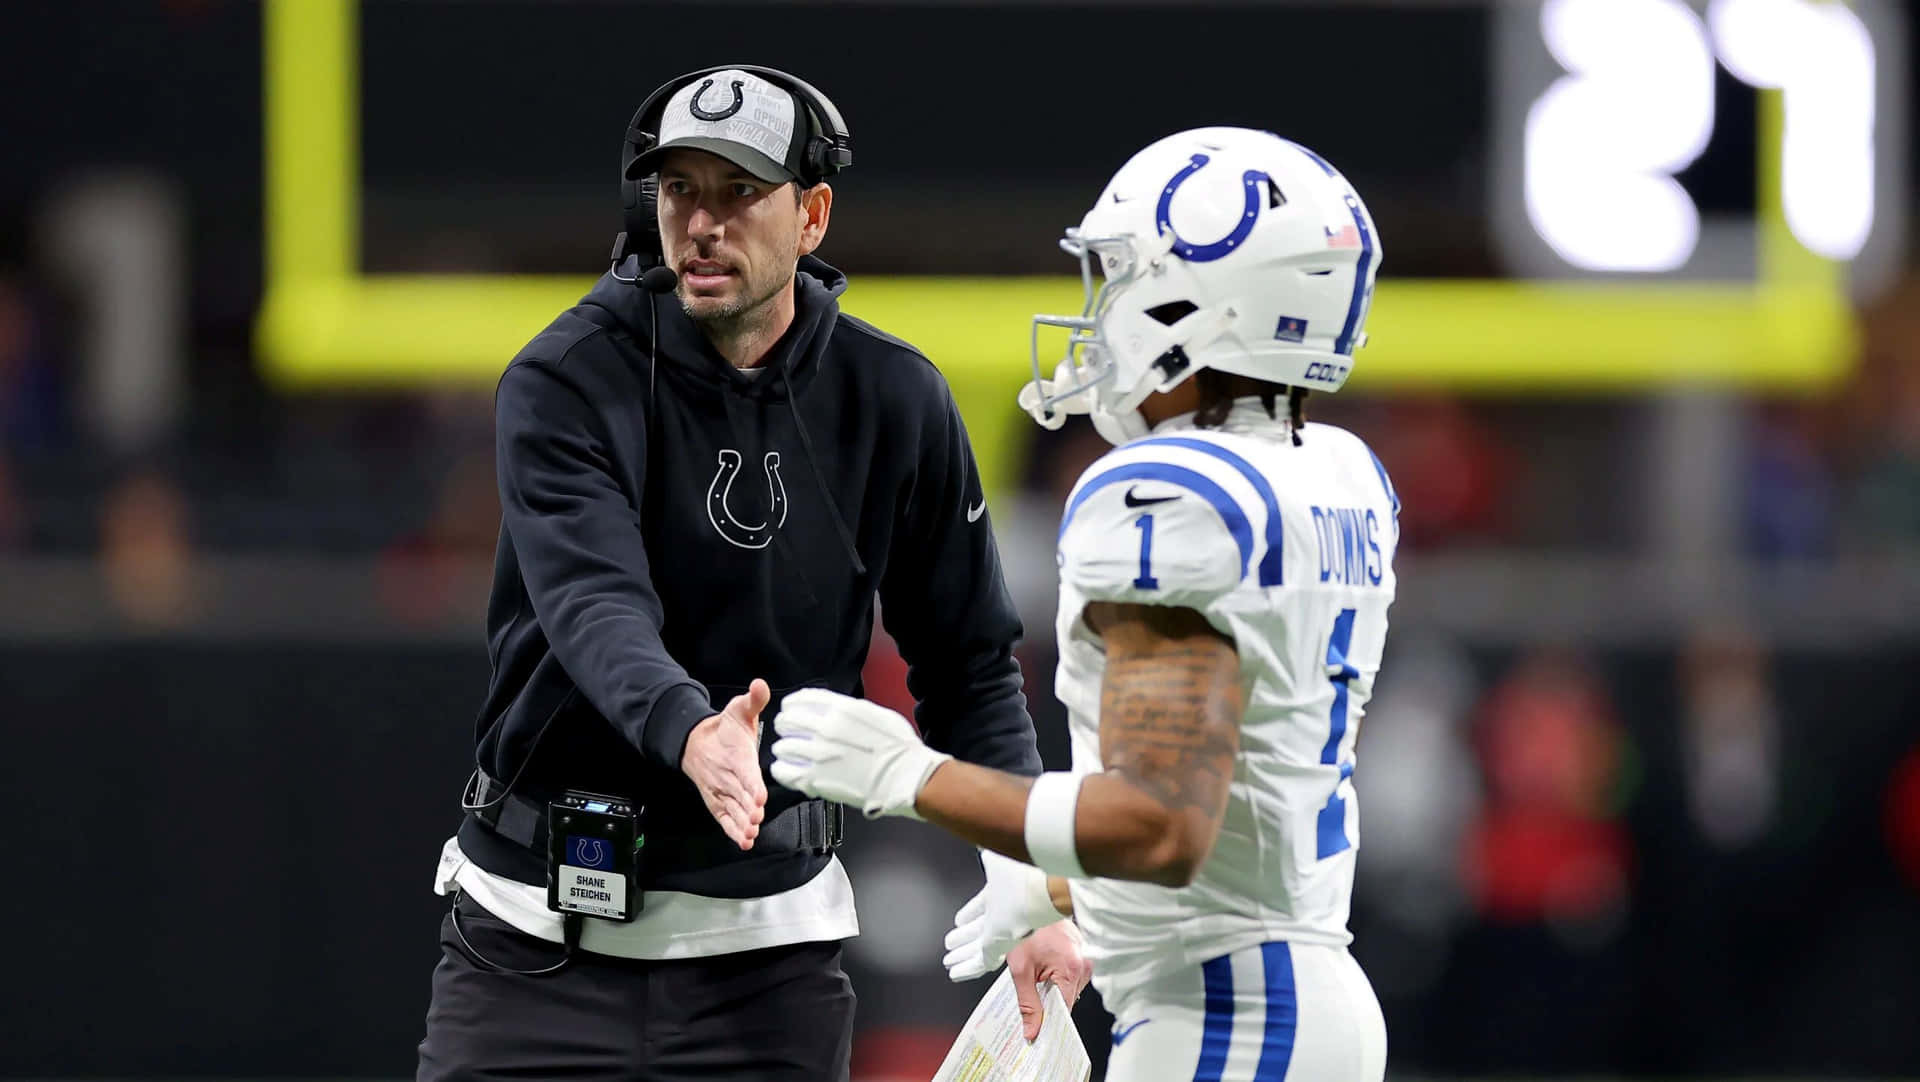 Colts Coach Player Interaction Wallpaper